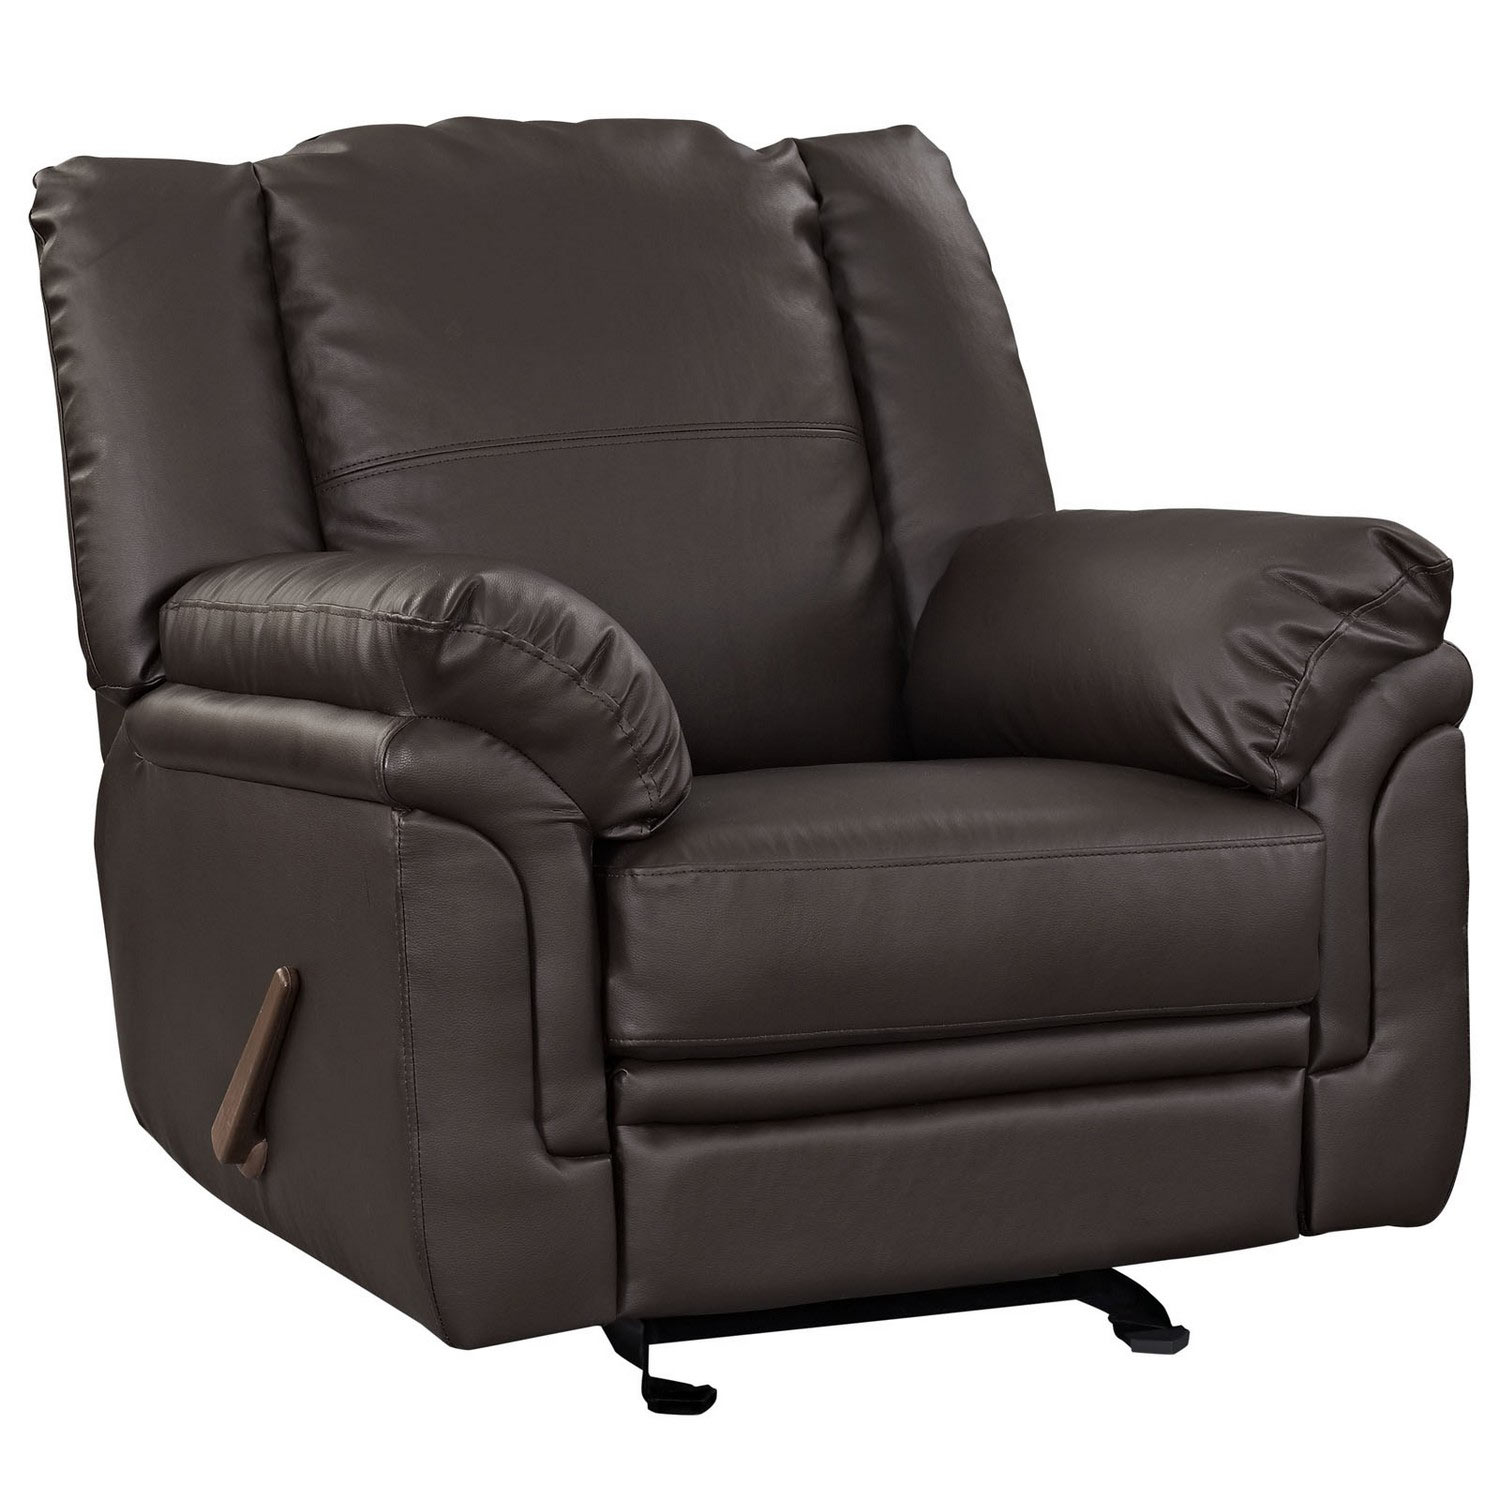 Modway Grand Recliner - Brown